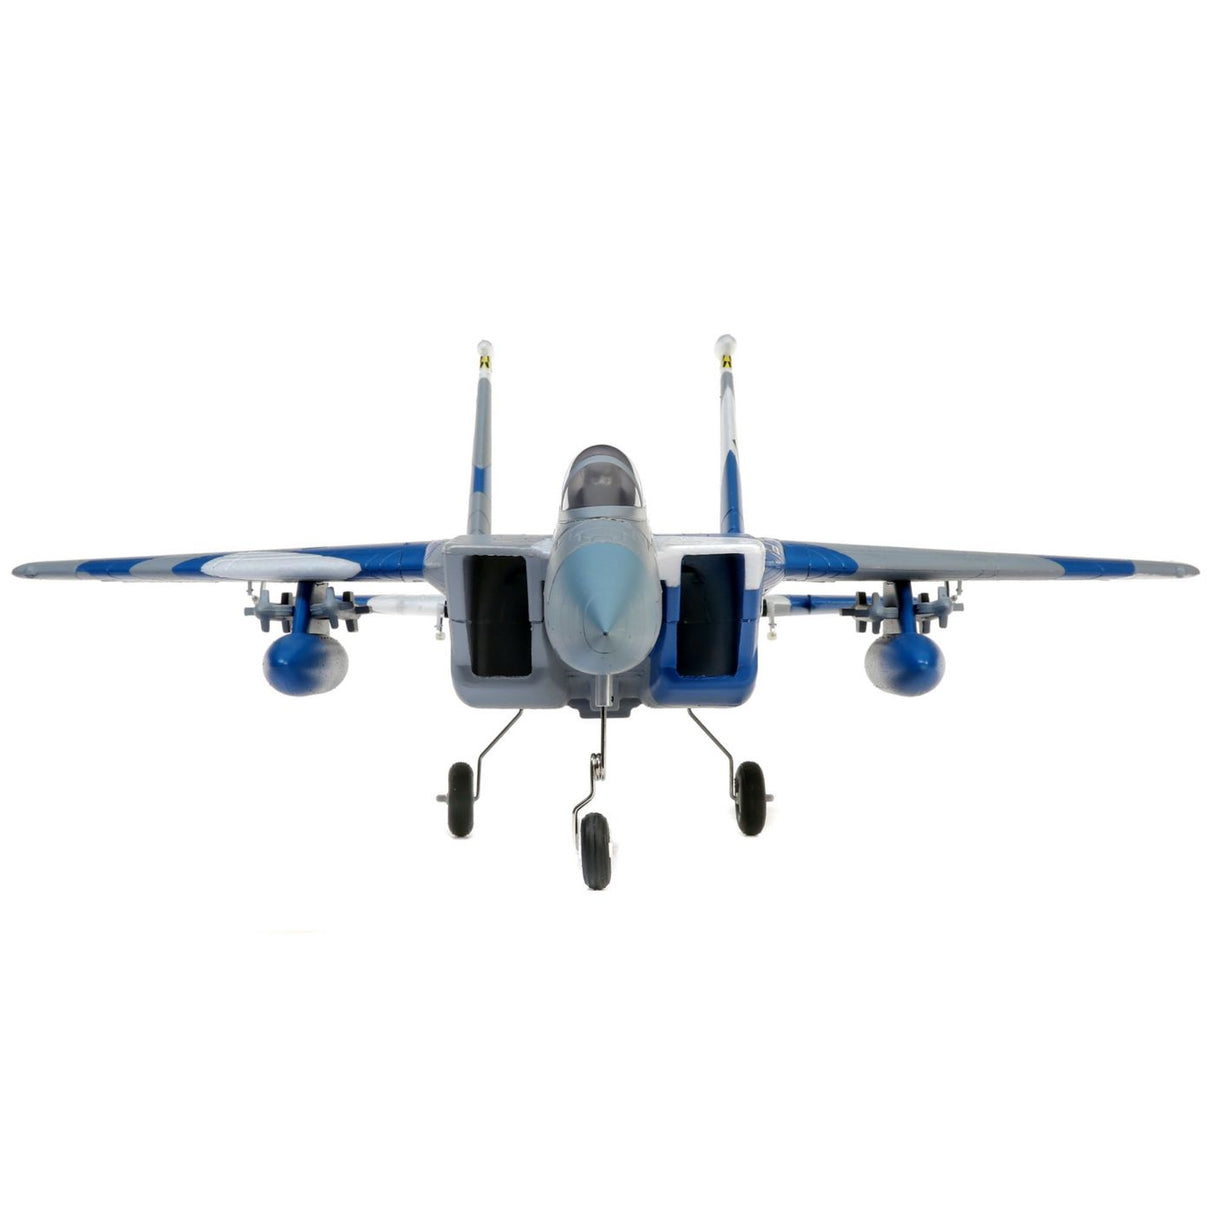 E-Flite EFL97500 F-15 Eagle 64mm EDF BNF Basic Electric Ducted Fan Jet E-Flite RC PLANES